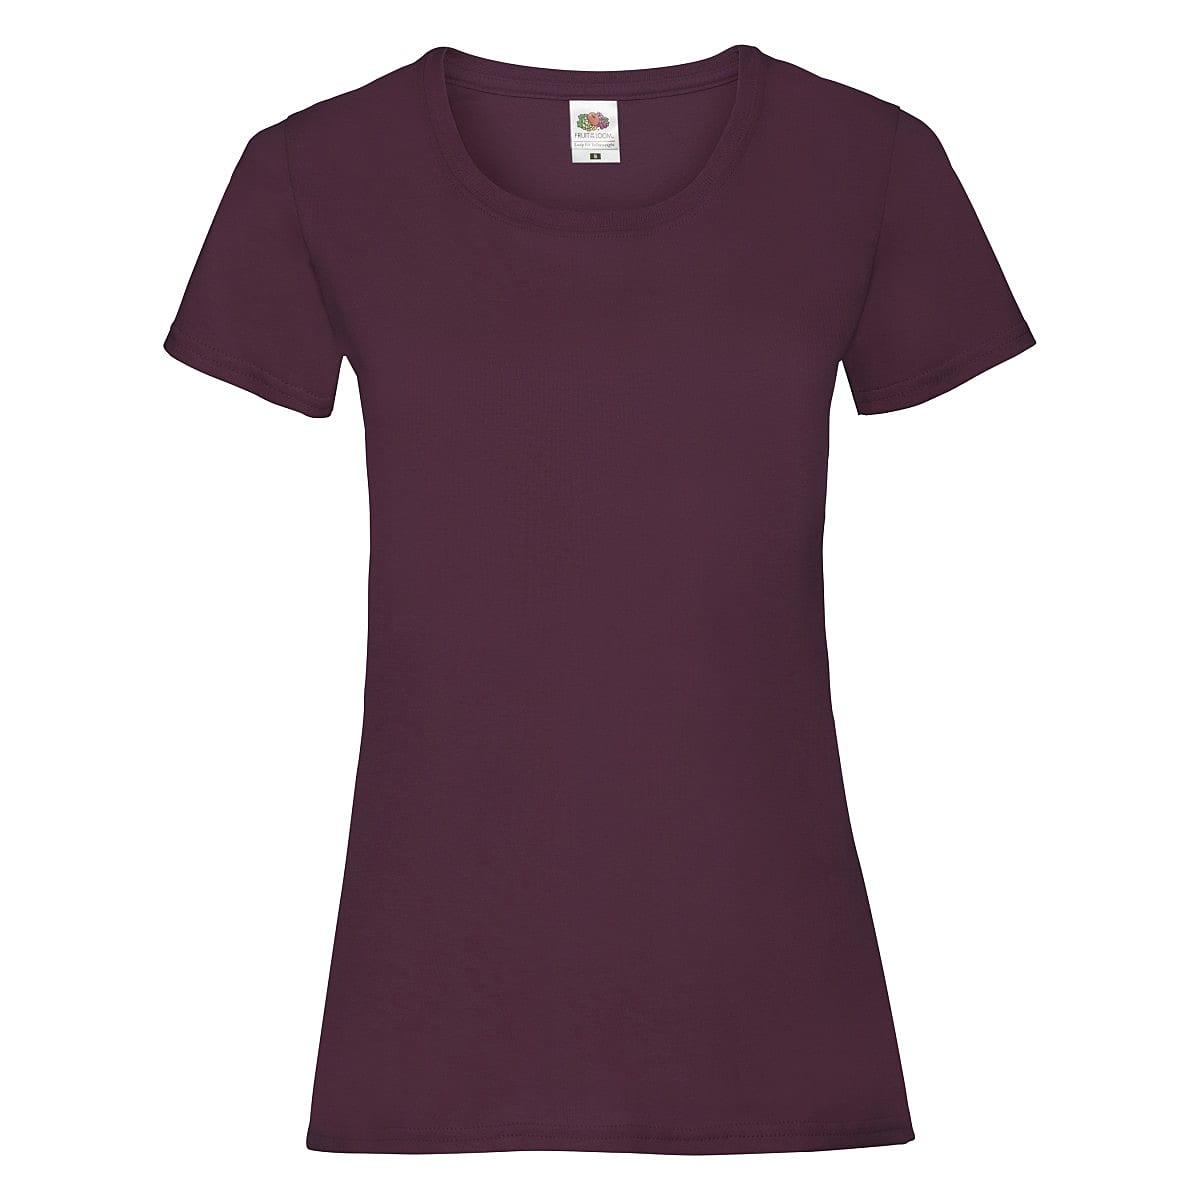 Fruit Of The Loom Lady-Fit Valueweight T-Shirt in Burgundy (Product Code: 61372)